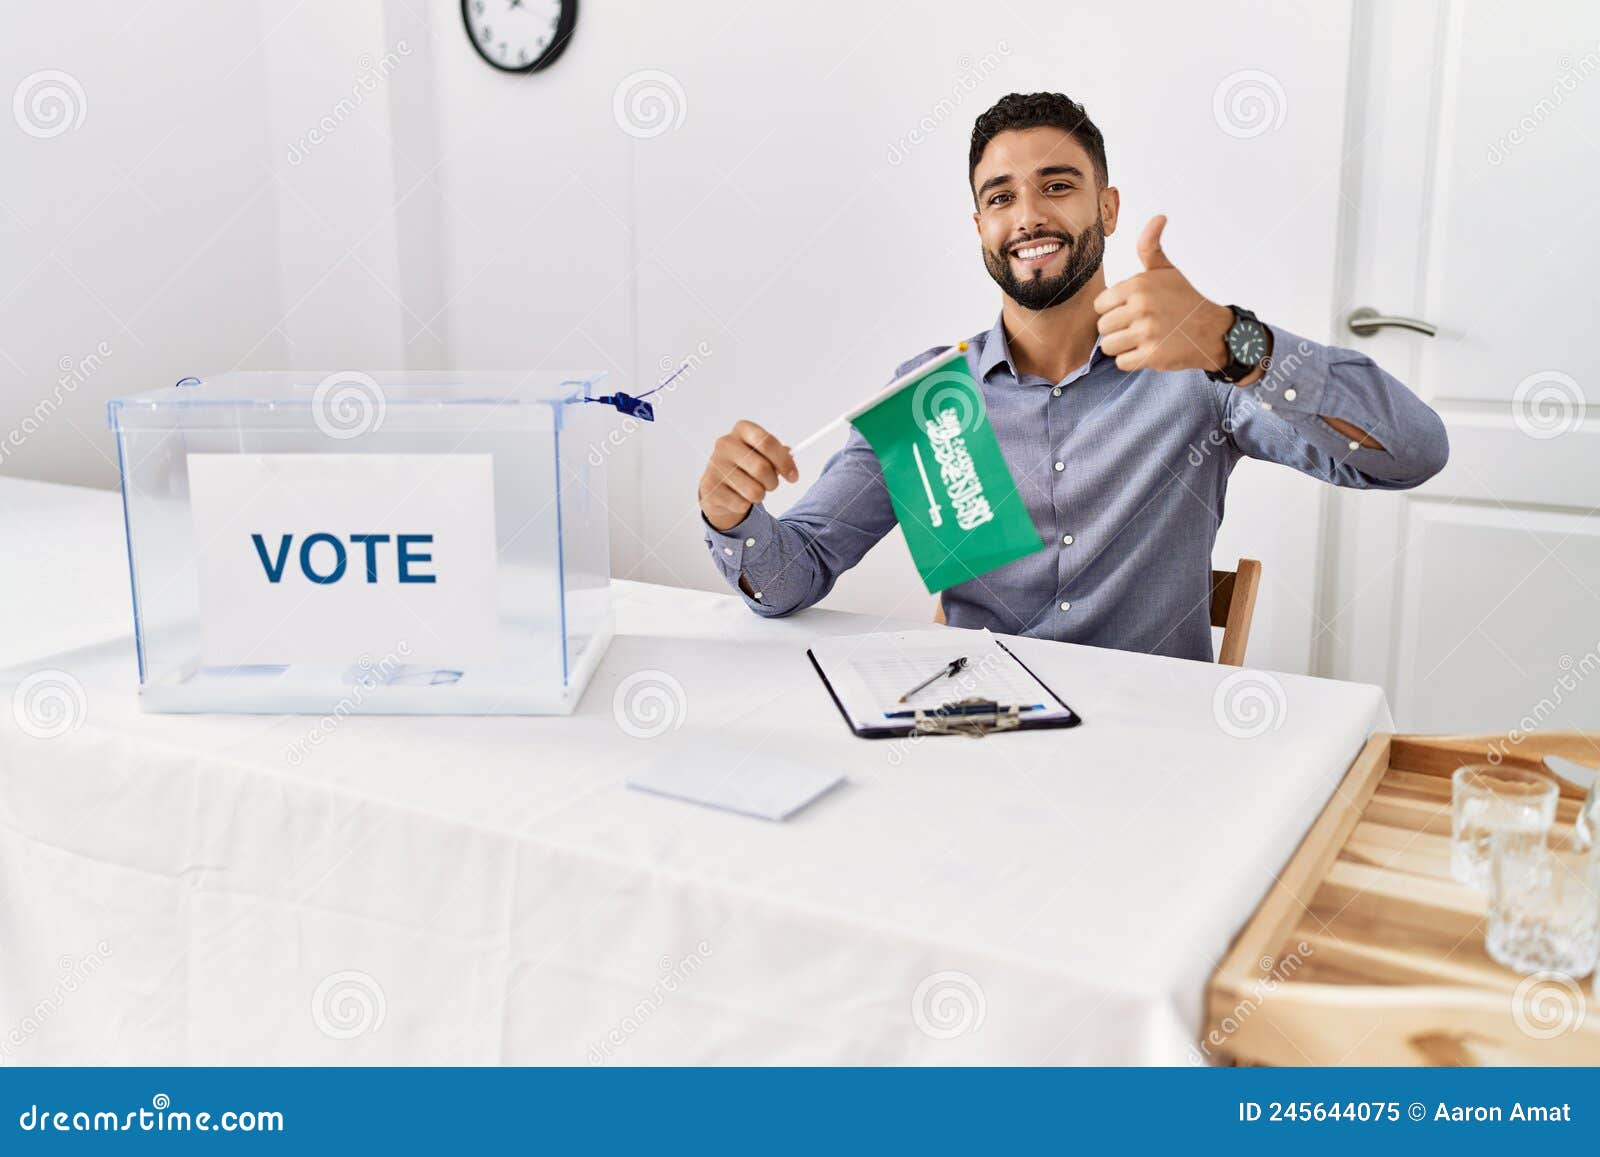 young handsome man with beard at political campaign election holding arabia saudita flag smiling happy and positive, thumb up